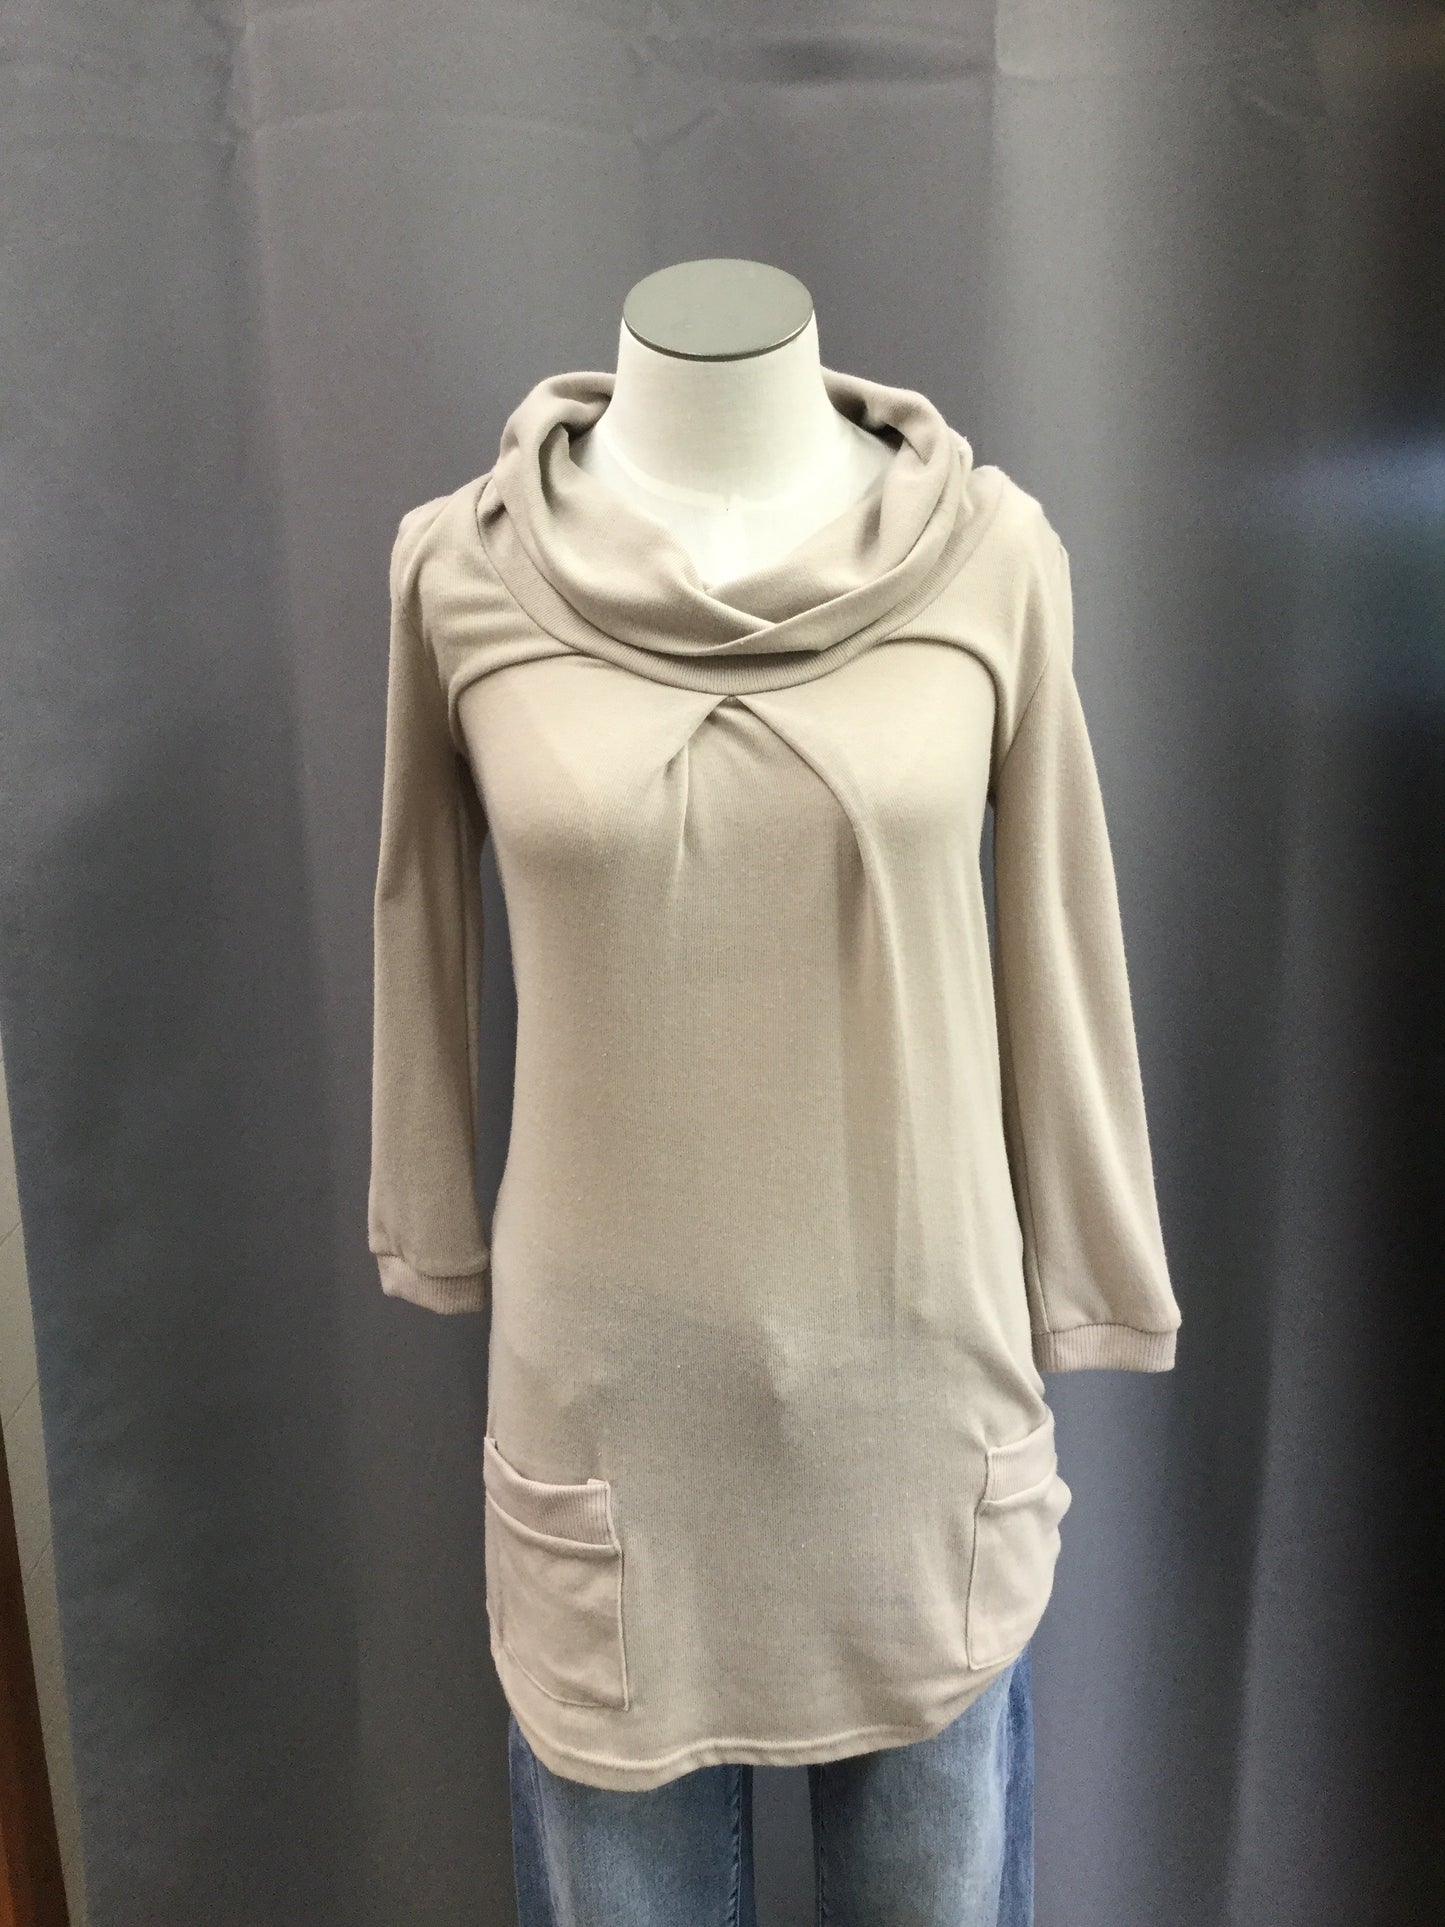 3/4 sleeve cowl neck sweater with front pockets